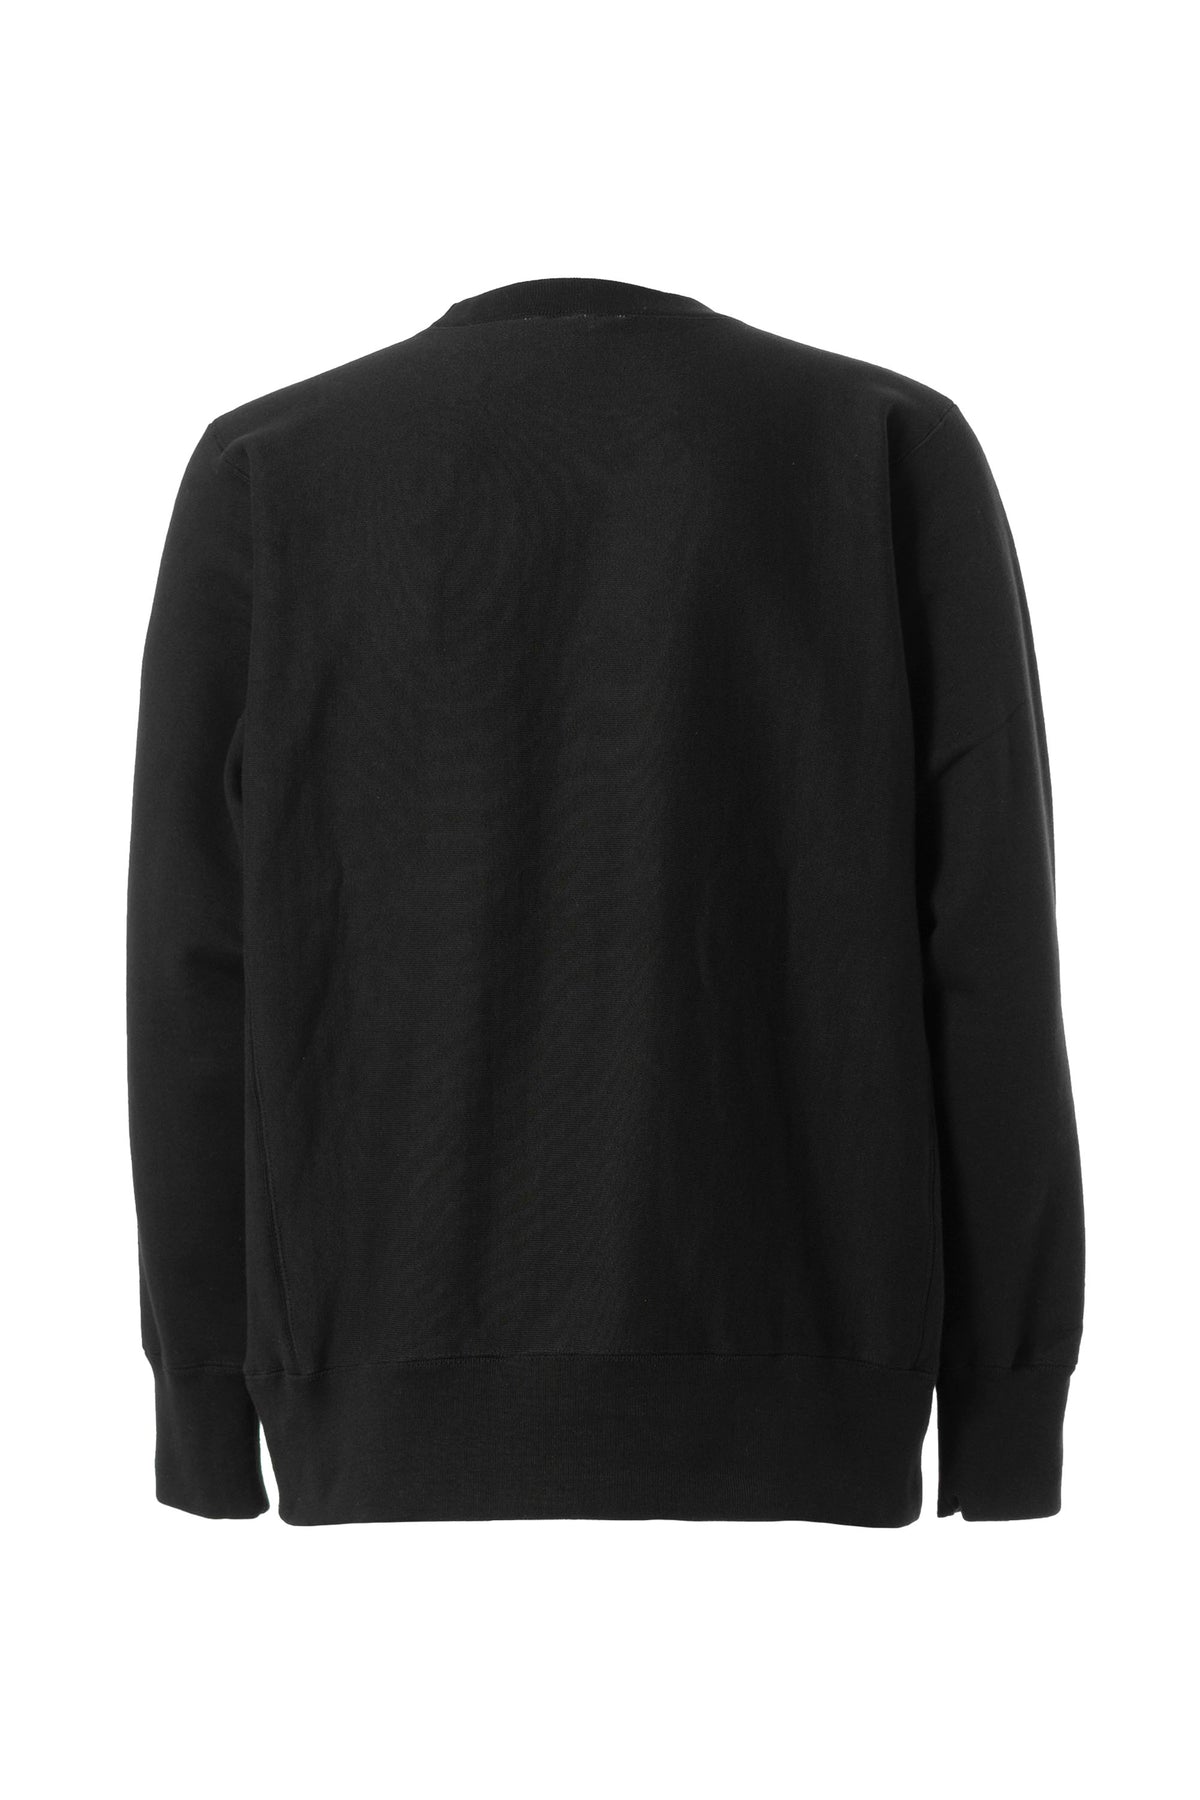 Plusticview COLLEGE LOGO SWEATER  / BLK